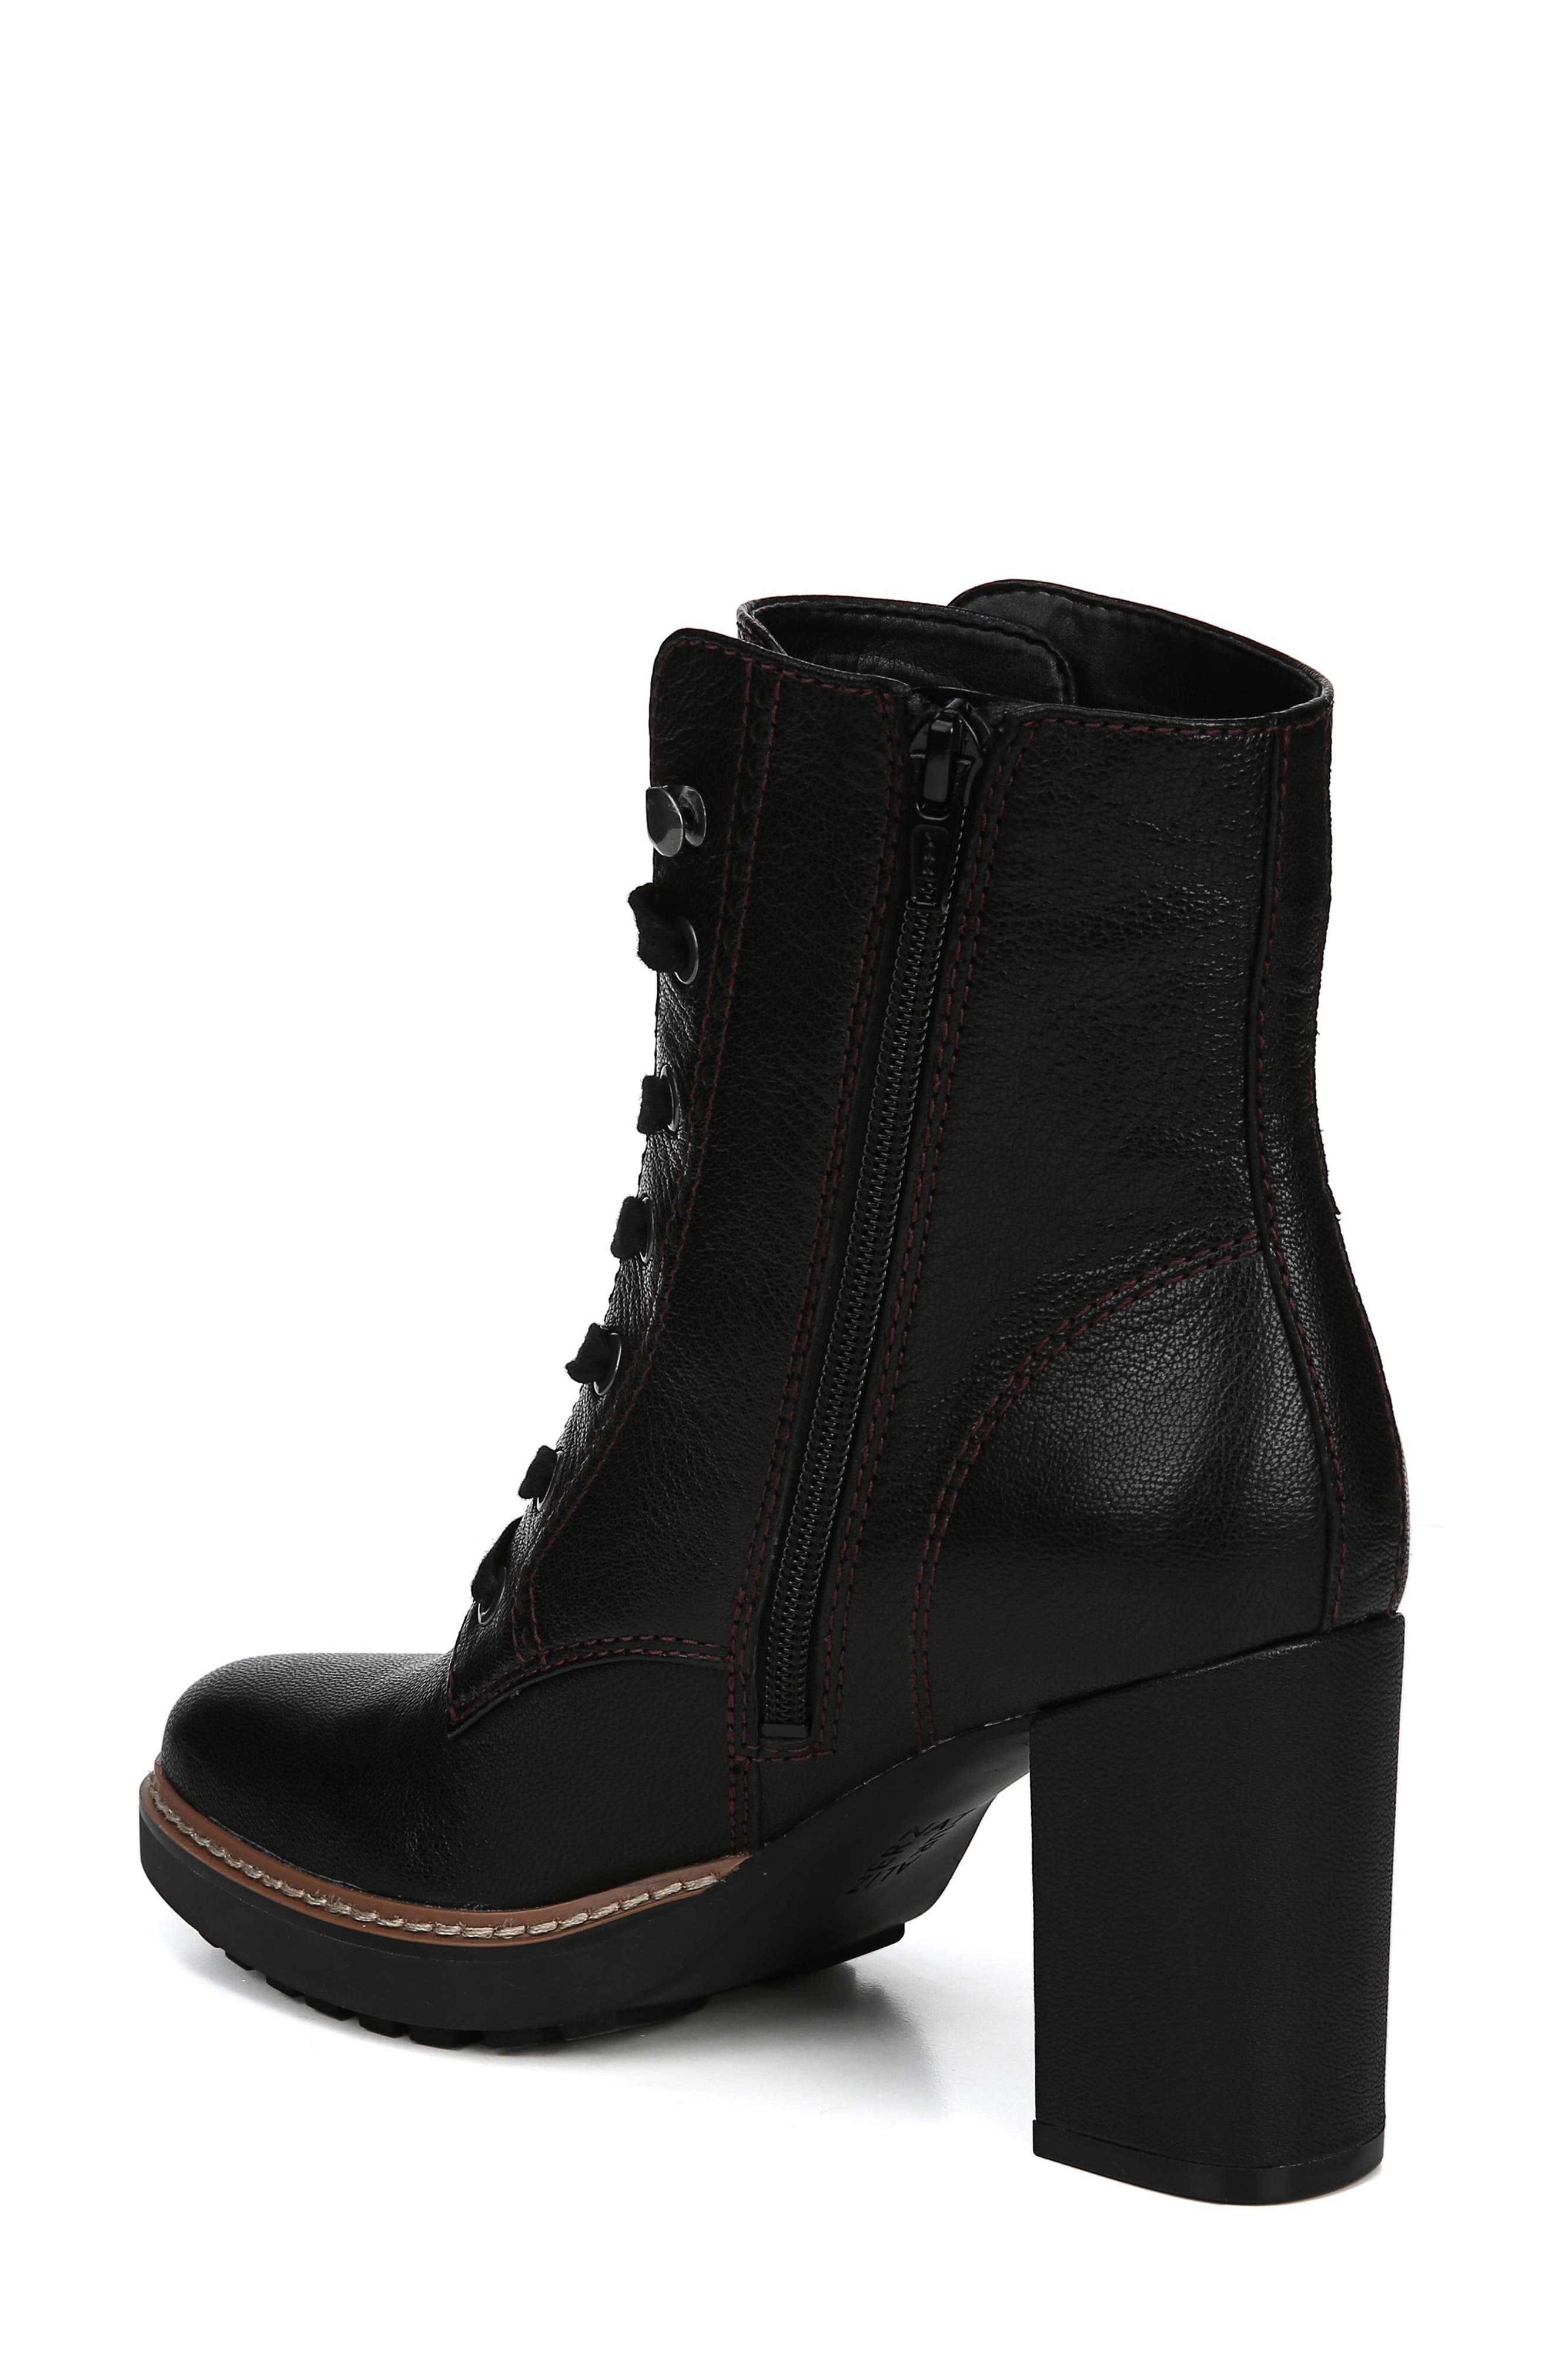 naturalizer callie lace up boot